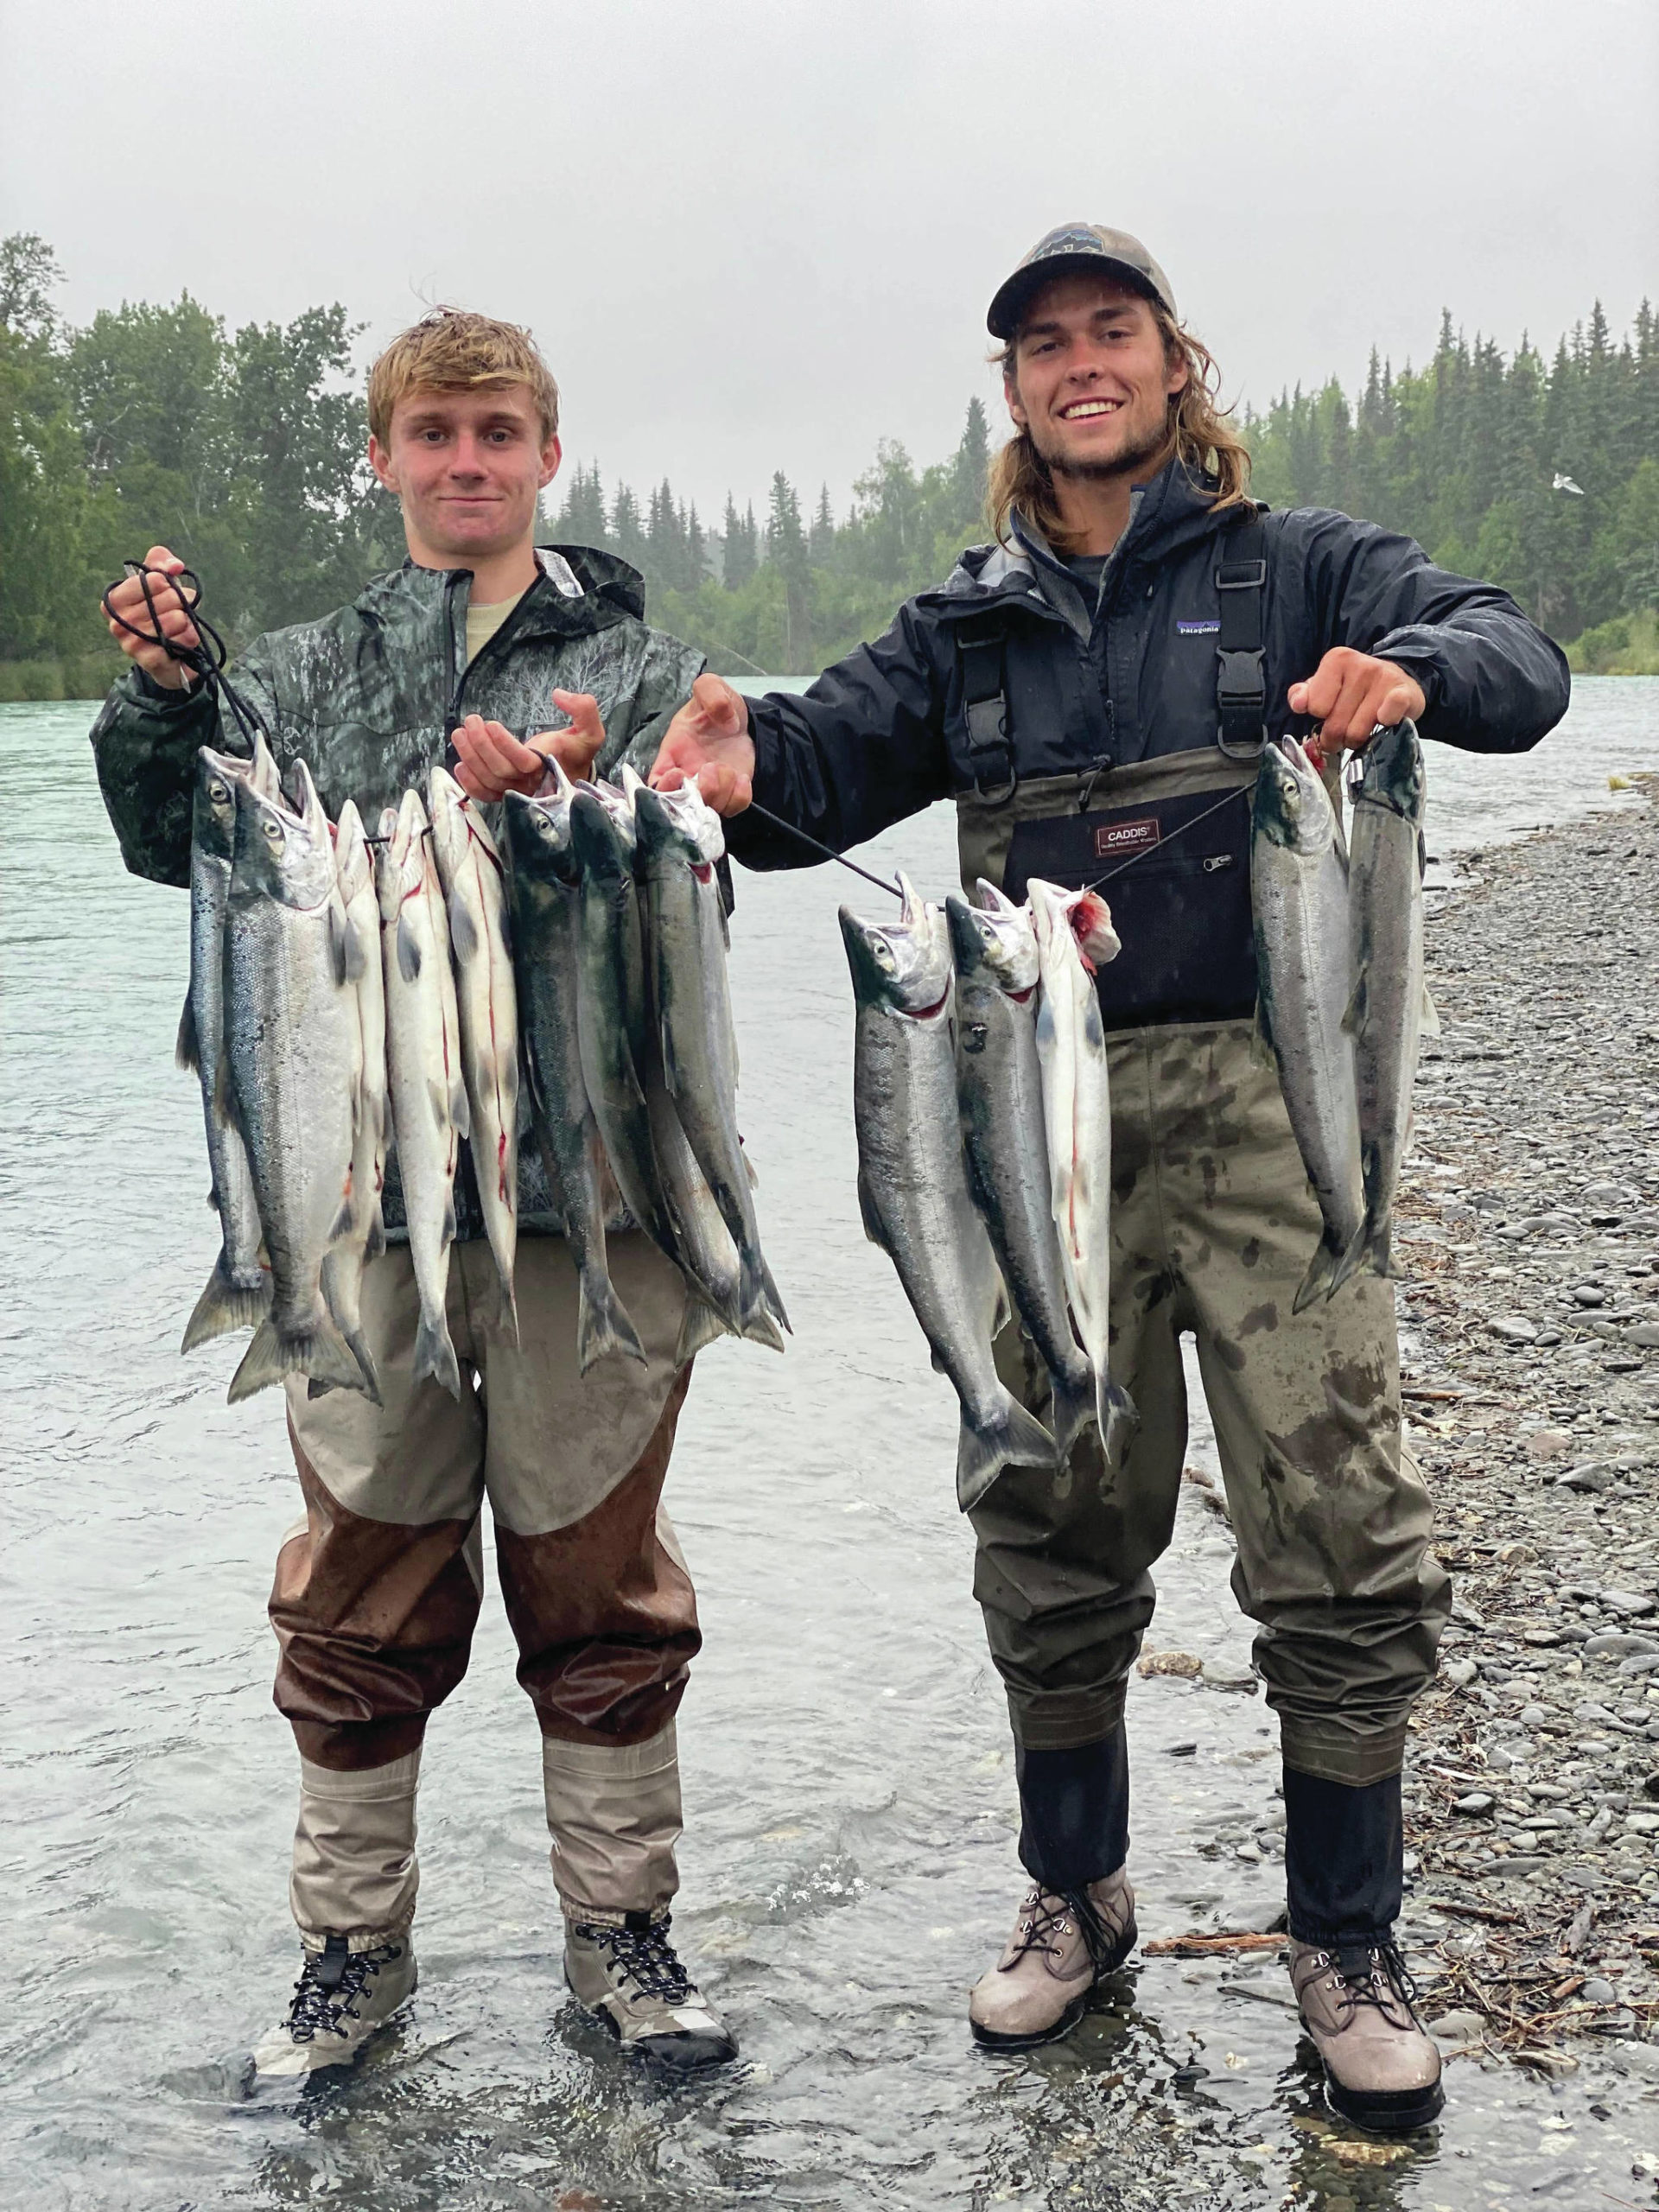 Photo provided 
Daniel Balserak and Luke Konson fish for salmon in Alaska. The pair has been traveling the country and catching every official state fish for the past 11 months.